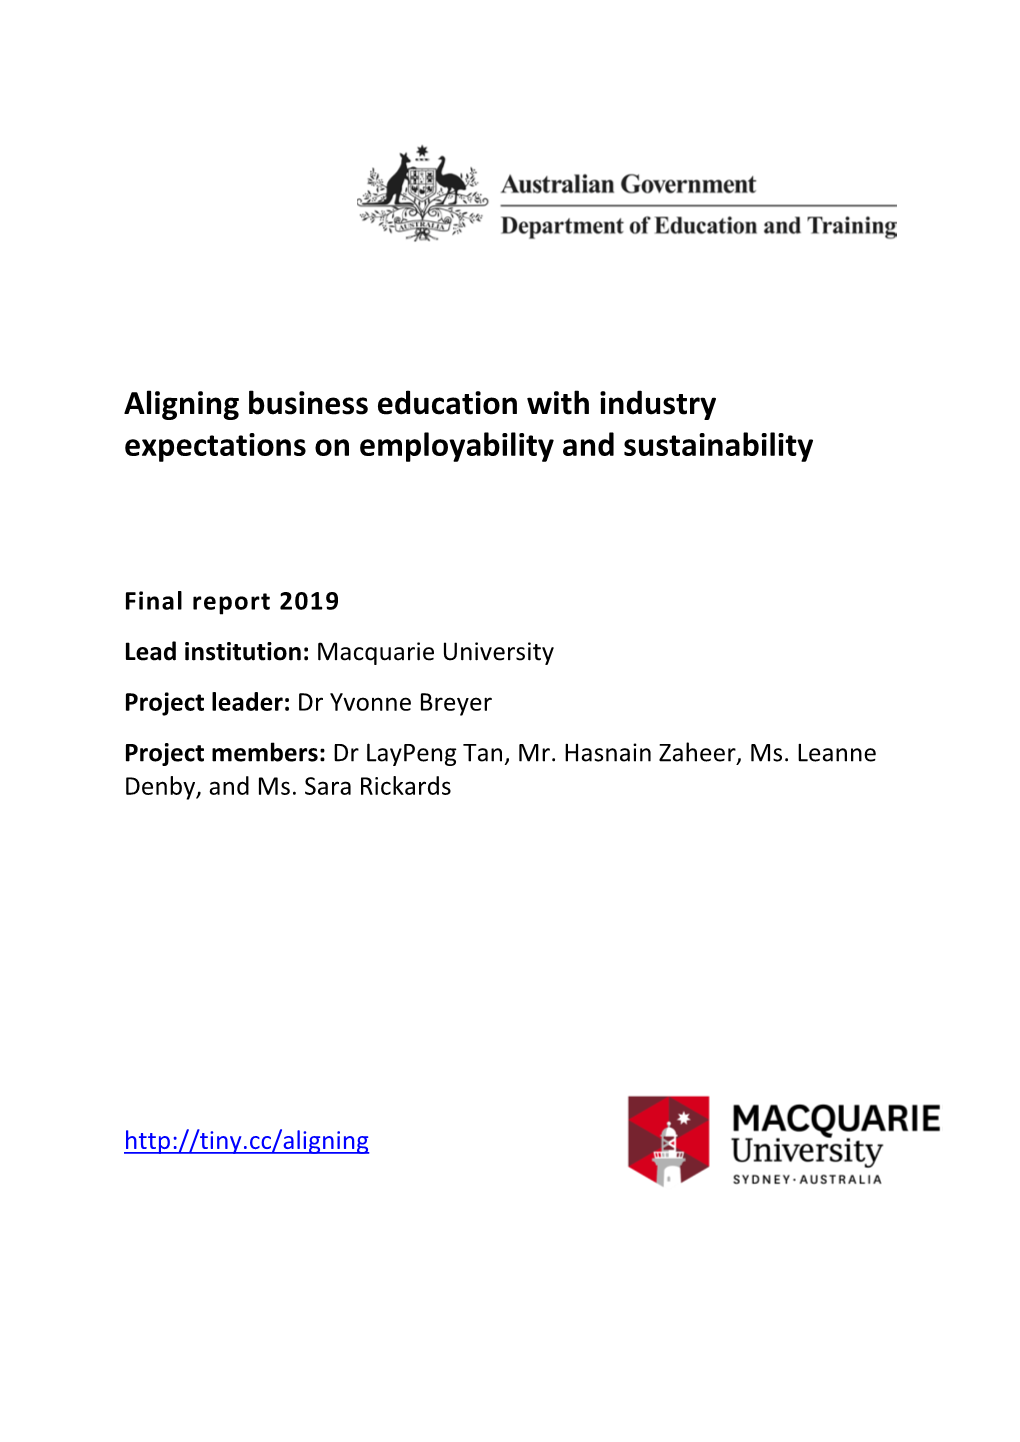 Aligning Business Education with Industry Expectations on Employability and Sustainability